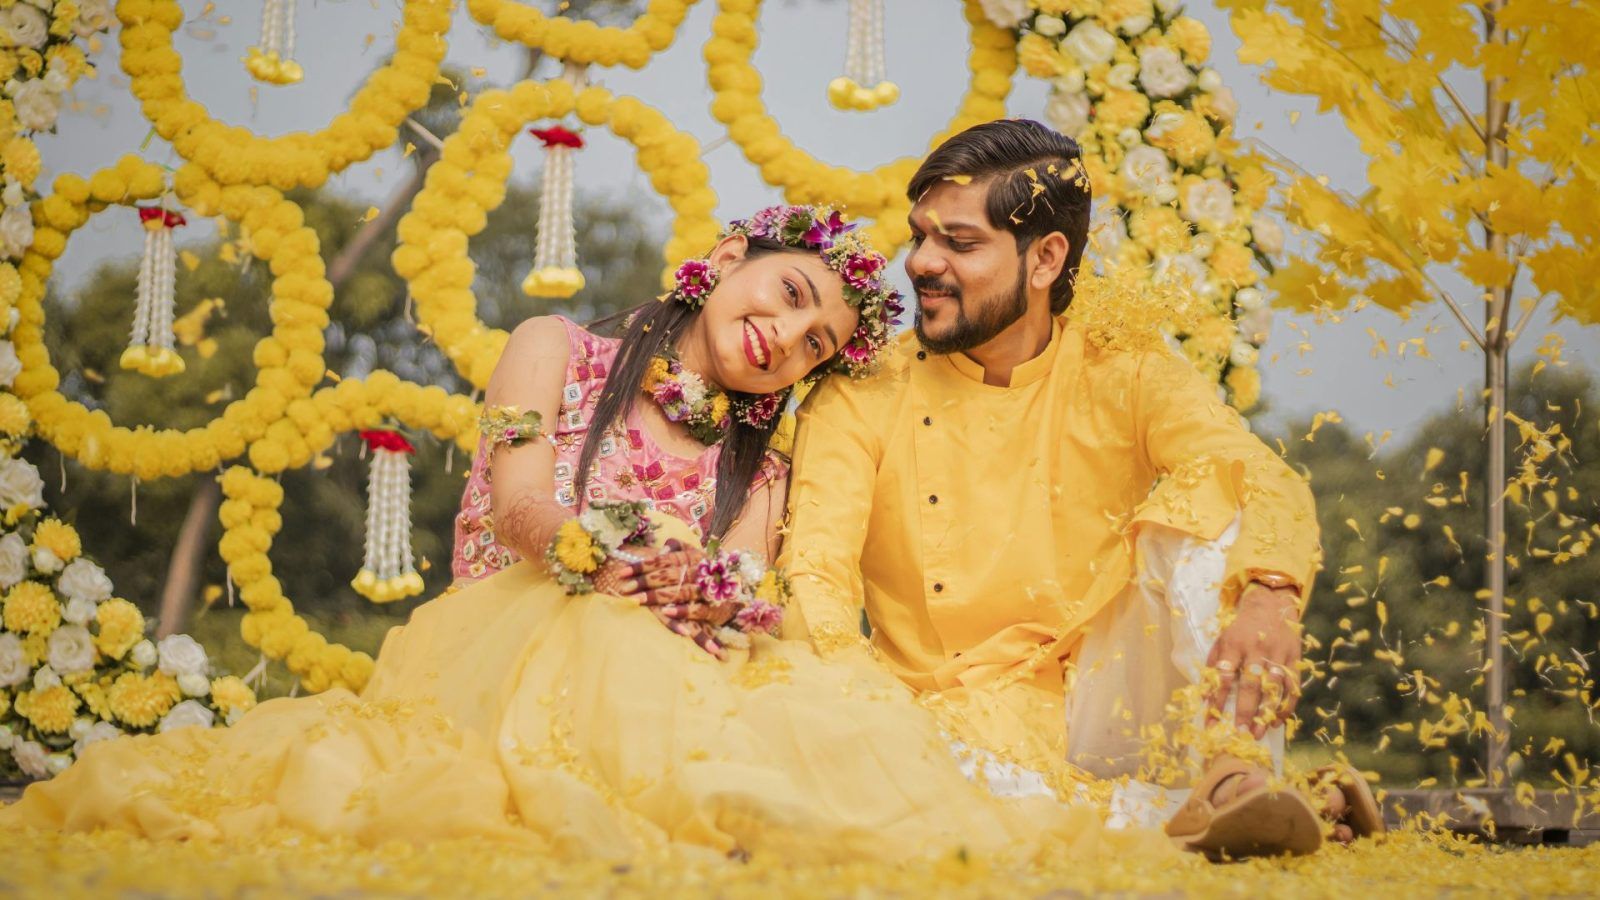 Grab The Attention With These Amazing Haldi Ceremony Outfits | Casual  wedding outfit, Haldi ceremony outfit, Haldi dress ideas